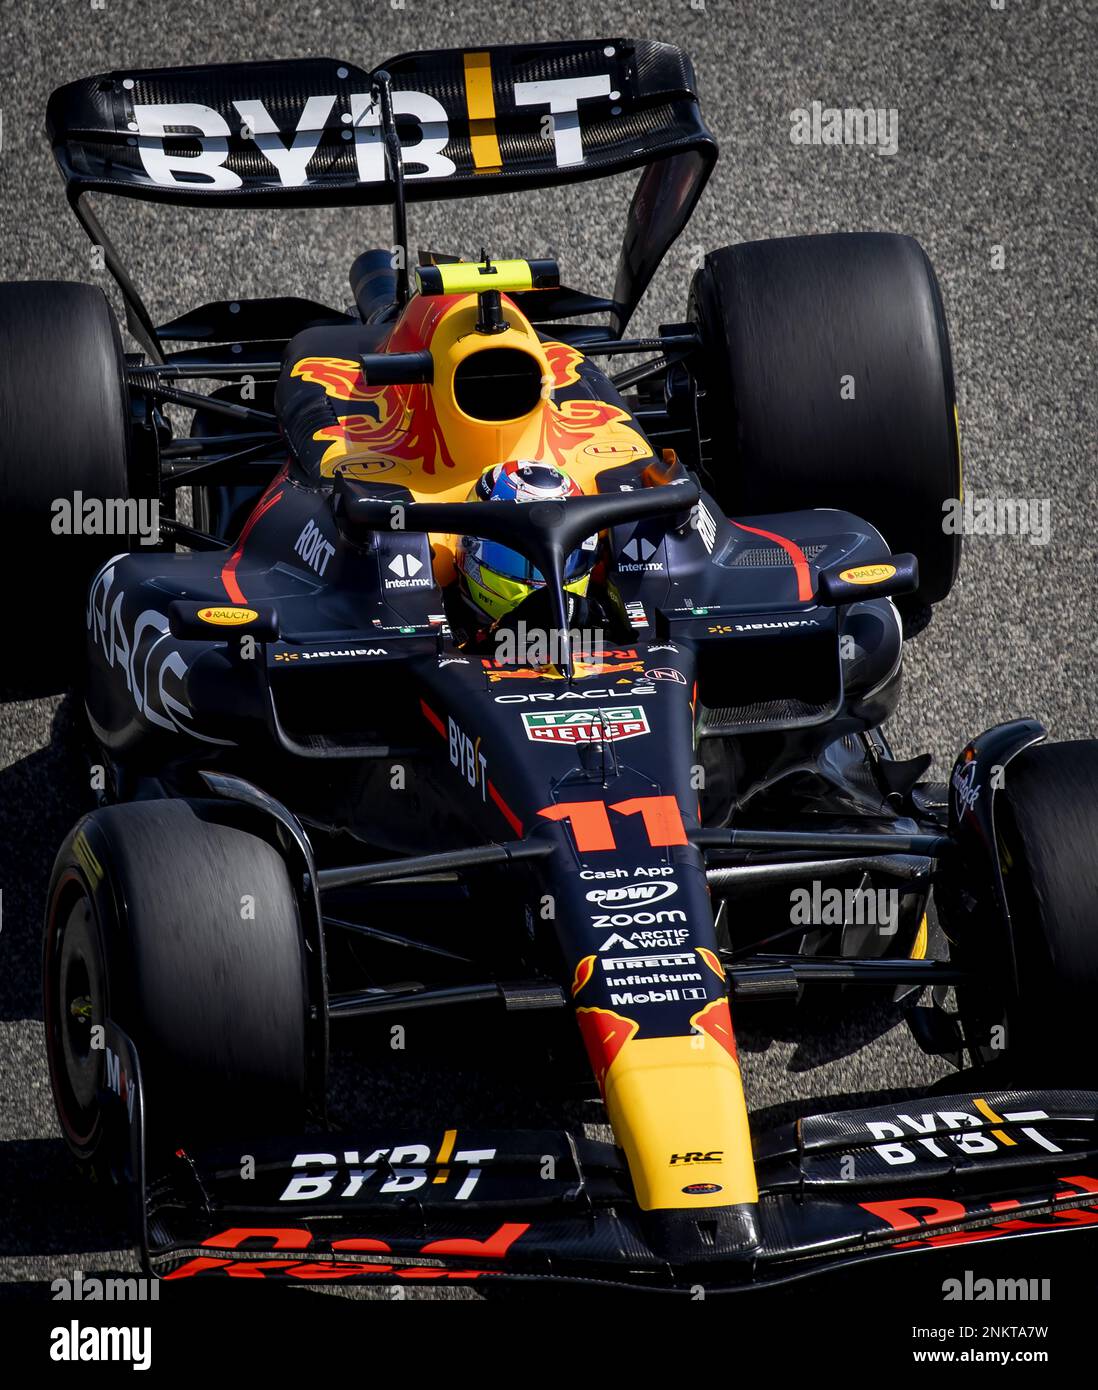 BAHRAIN - Sergio Perez (Red Bull Racing) during the second day of testing at the Bahrain International Circuit ahead of the start of the Formula 1 season. ANP SEM VAN DER WAL netherlands out - belgium out Stock Photo